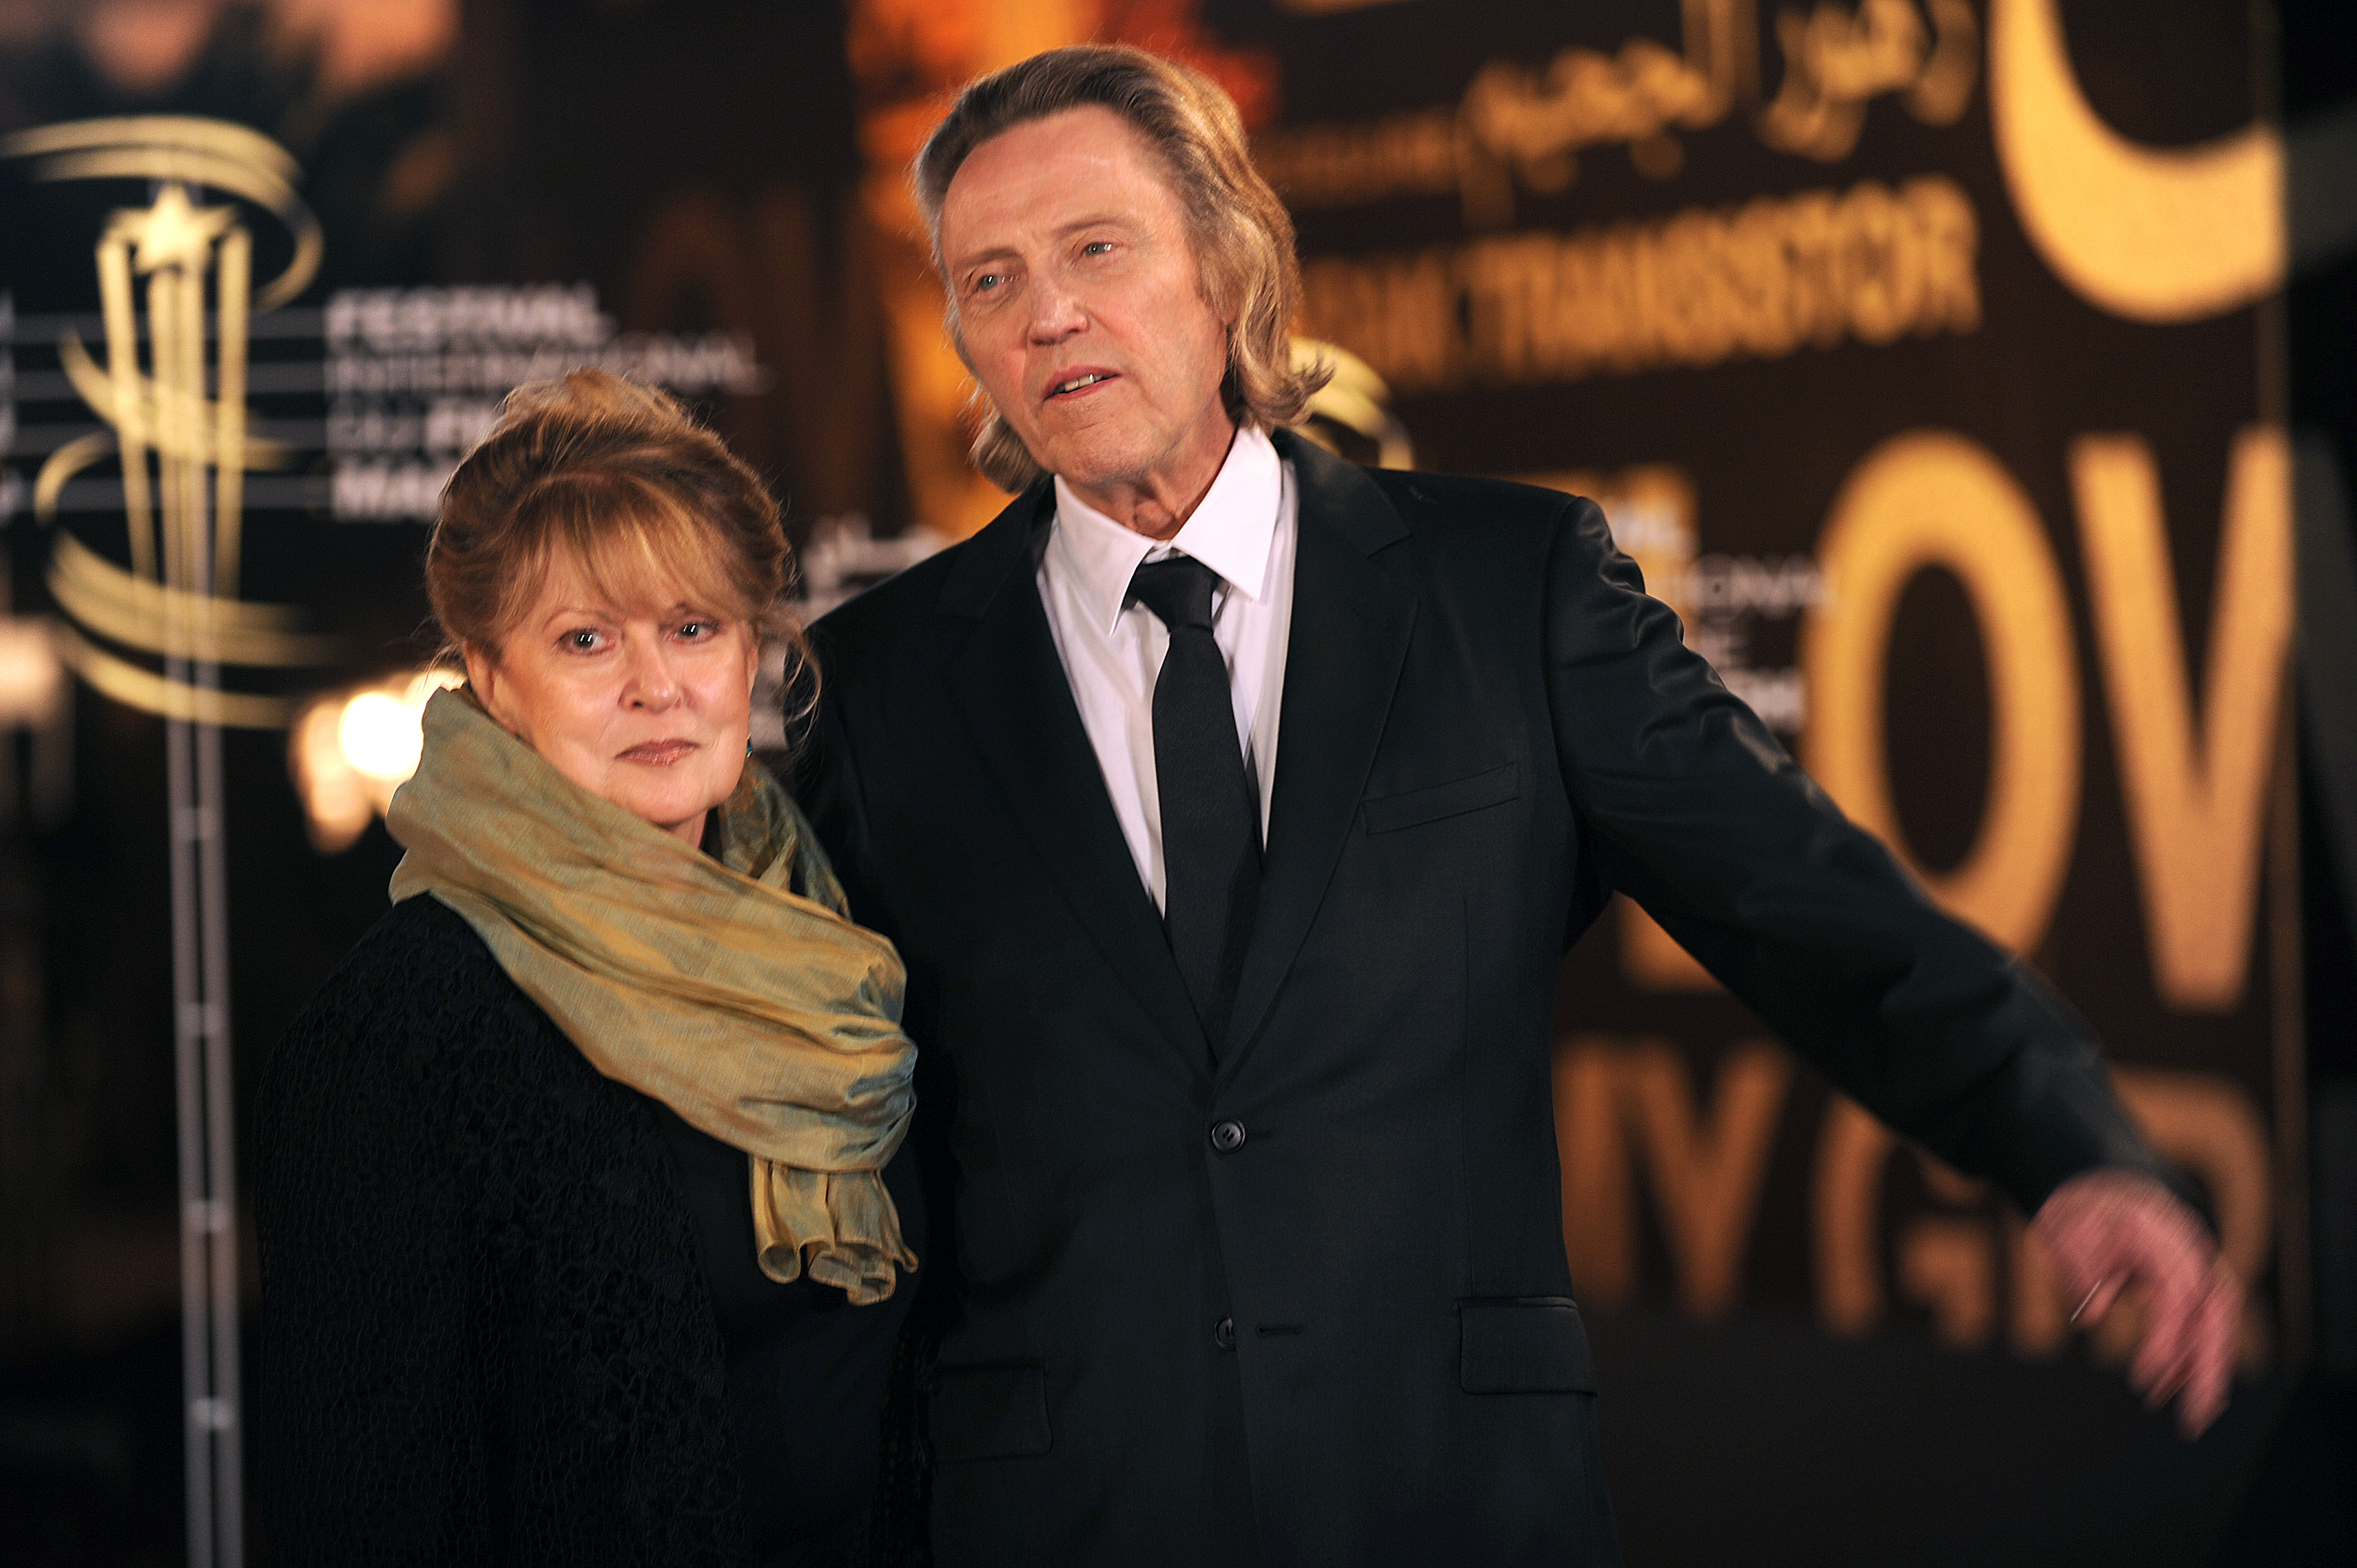 Christopher Walken and his wife Georgianne Walken during the ceremony honoring Christopher Walken at the 9th edition of the Marrakech International Film Festival on December 5, 2009 | Source: Getty Images